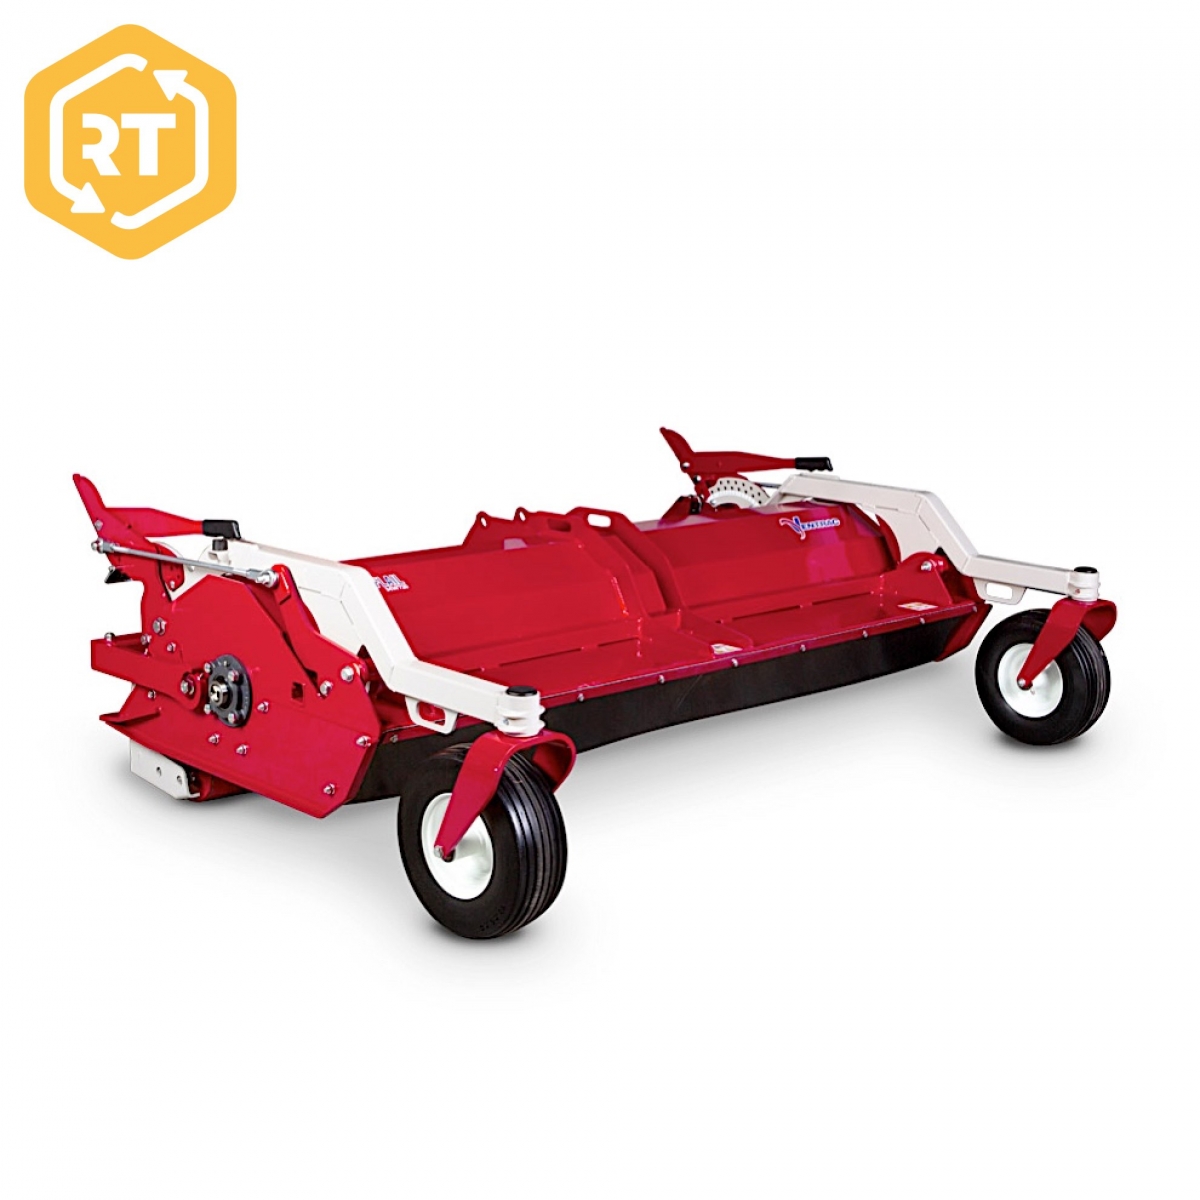 Ventrac MY560 Flail Mower | Available for Hire!